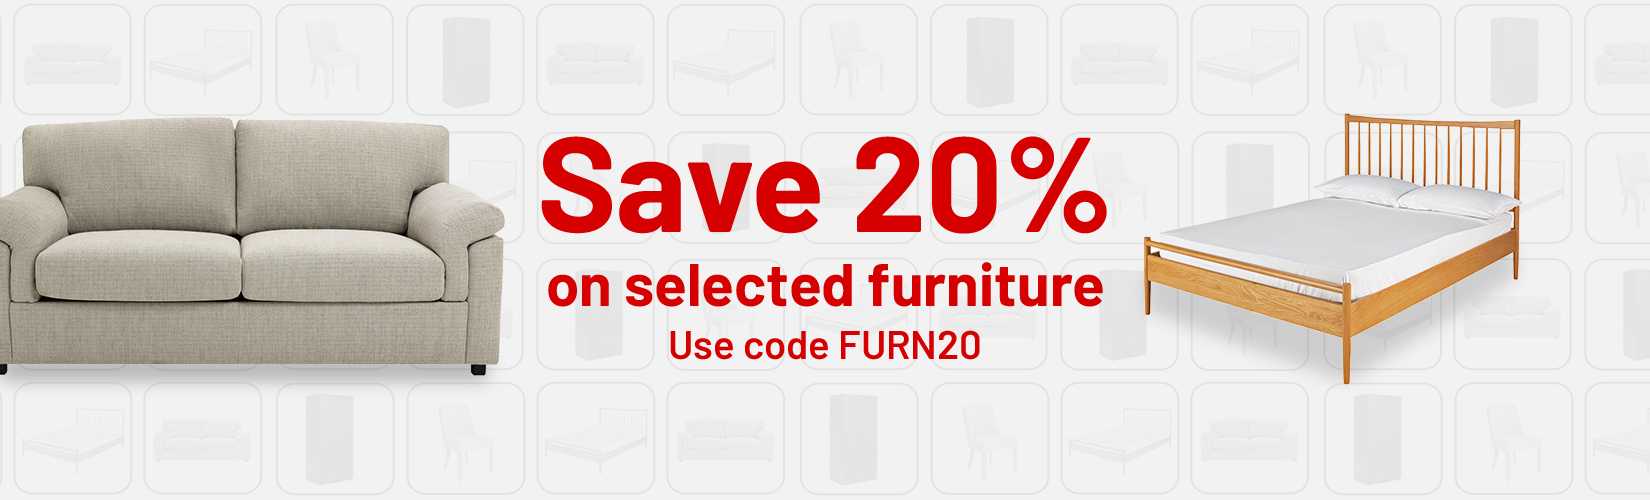 Save 20% on selected furniture. Use code FURN20.